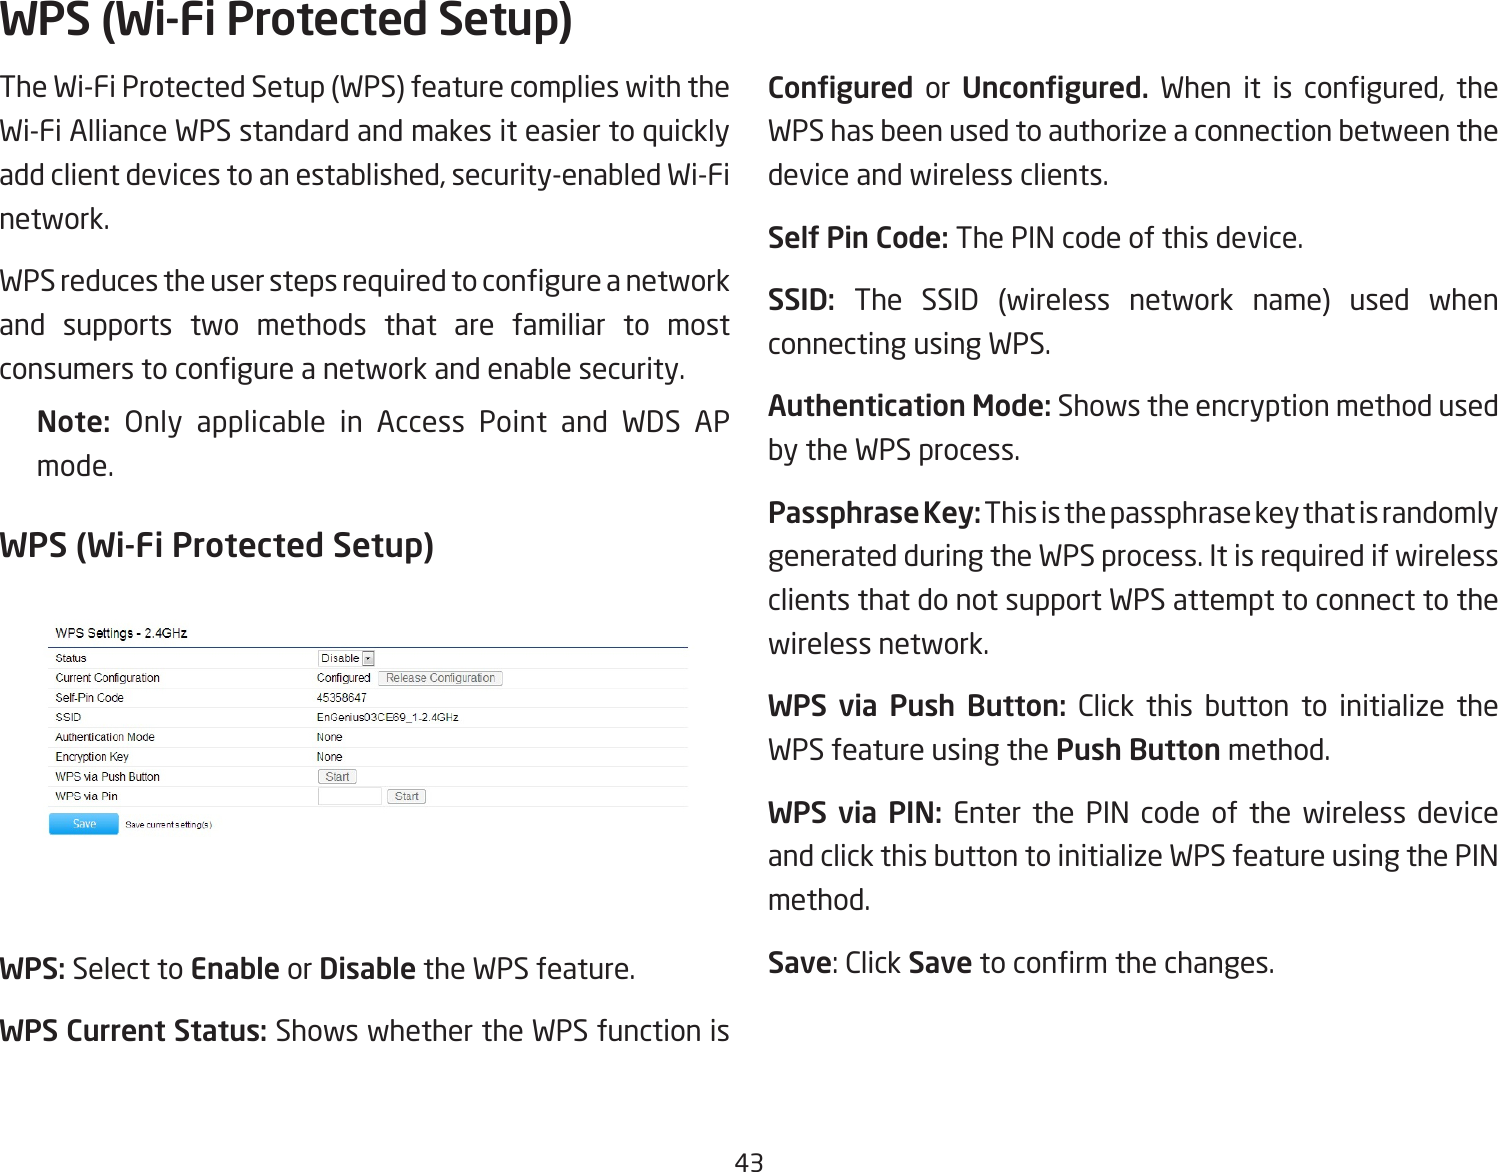 43The Wi-Fi Protected Setup (WPS) feature complies with the Wi-Fi Alliance WPS standard and makes it easier to quickly addclientdevicestoanestablished,security-enabledWi-Finetwork. WPSreducestheuserstepsrequiredtocongureanetworkand supports two methods that are familiar to most consumerstocongureanetworkandenablesecurity.Note:  Only applicable in Access Point and WDS AP mode.WPS (Wi-Fi Protected Setup)WPS: Select to Enable or Disable the WPS feature.WPS Current Status: Shows whether the WPS function is Congured  or  Uncongured. When it is congured, theWPS has been used to authorize a connection between the device and wireless clients.Self Pin Code: The PIN code of this device.SSID:  The SSID (wireless network name) used when connecting using WPS.Authentication Mode: Shows the encryption method used by the WPS process.Passphrase Key: This is the passphrase key that is randomly generated during the WPS process. It is required if wireless clients that do not support WPS attempt to connect to the wireless network.WPS  via  Push  Button: Click this button to initialize the WPS feature using the Push Button method.WPS  via  PIN: Enter the PIN code of the wireless device and click this button to initialize WPS feature using the PIN method.Save:ClickSavetoconrmthechanges.WPS (Wi-Fi Protected Setup)